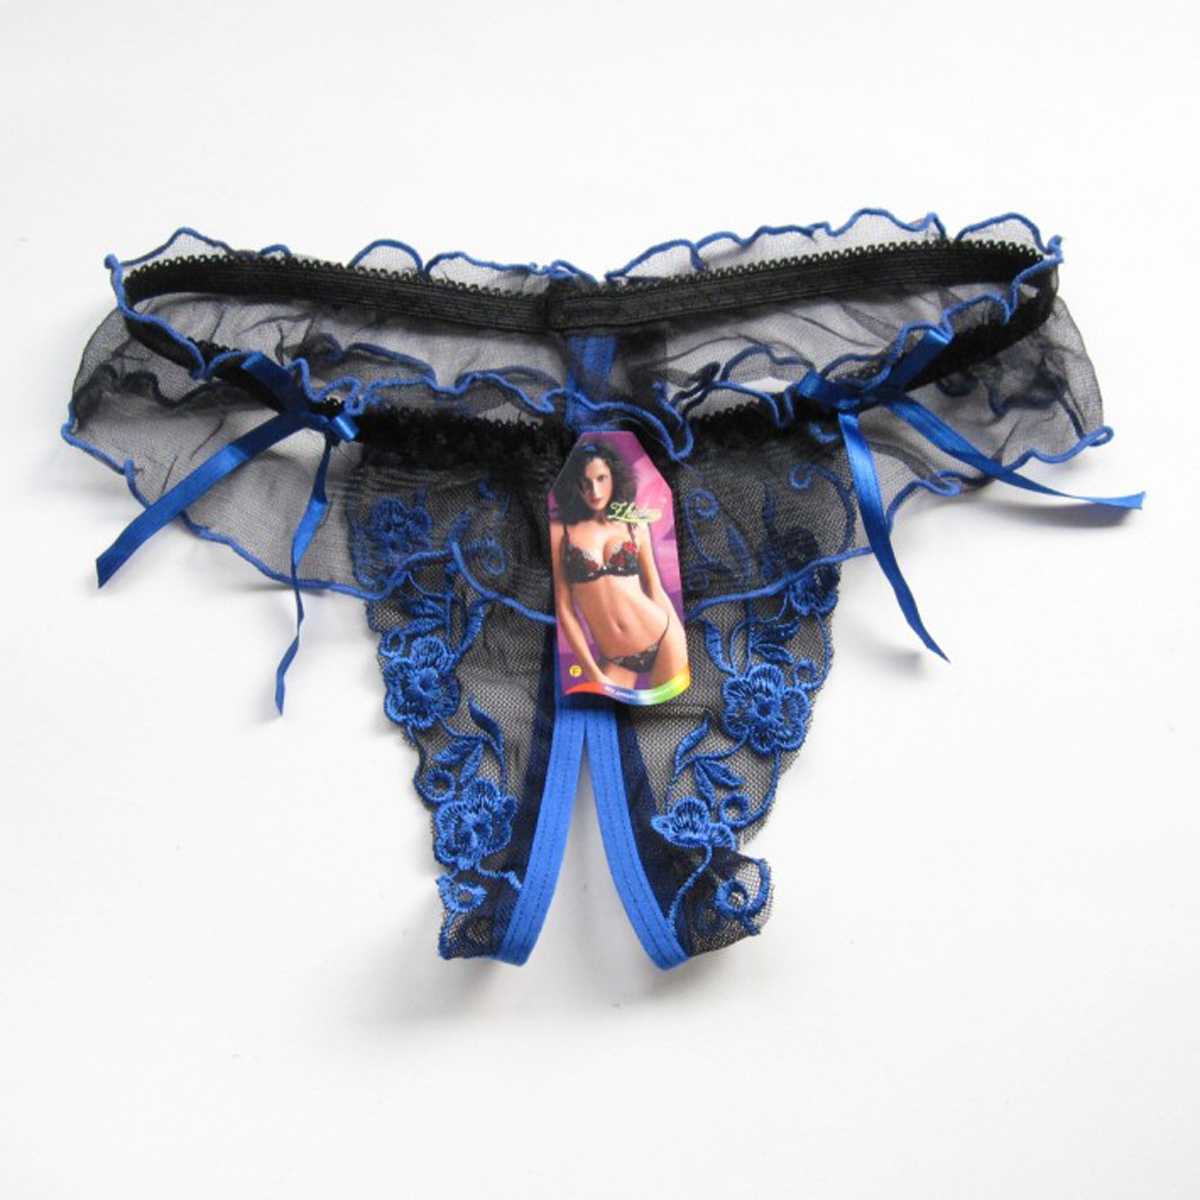 Flower Embroidered Crotchless Panties